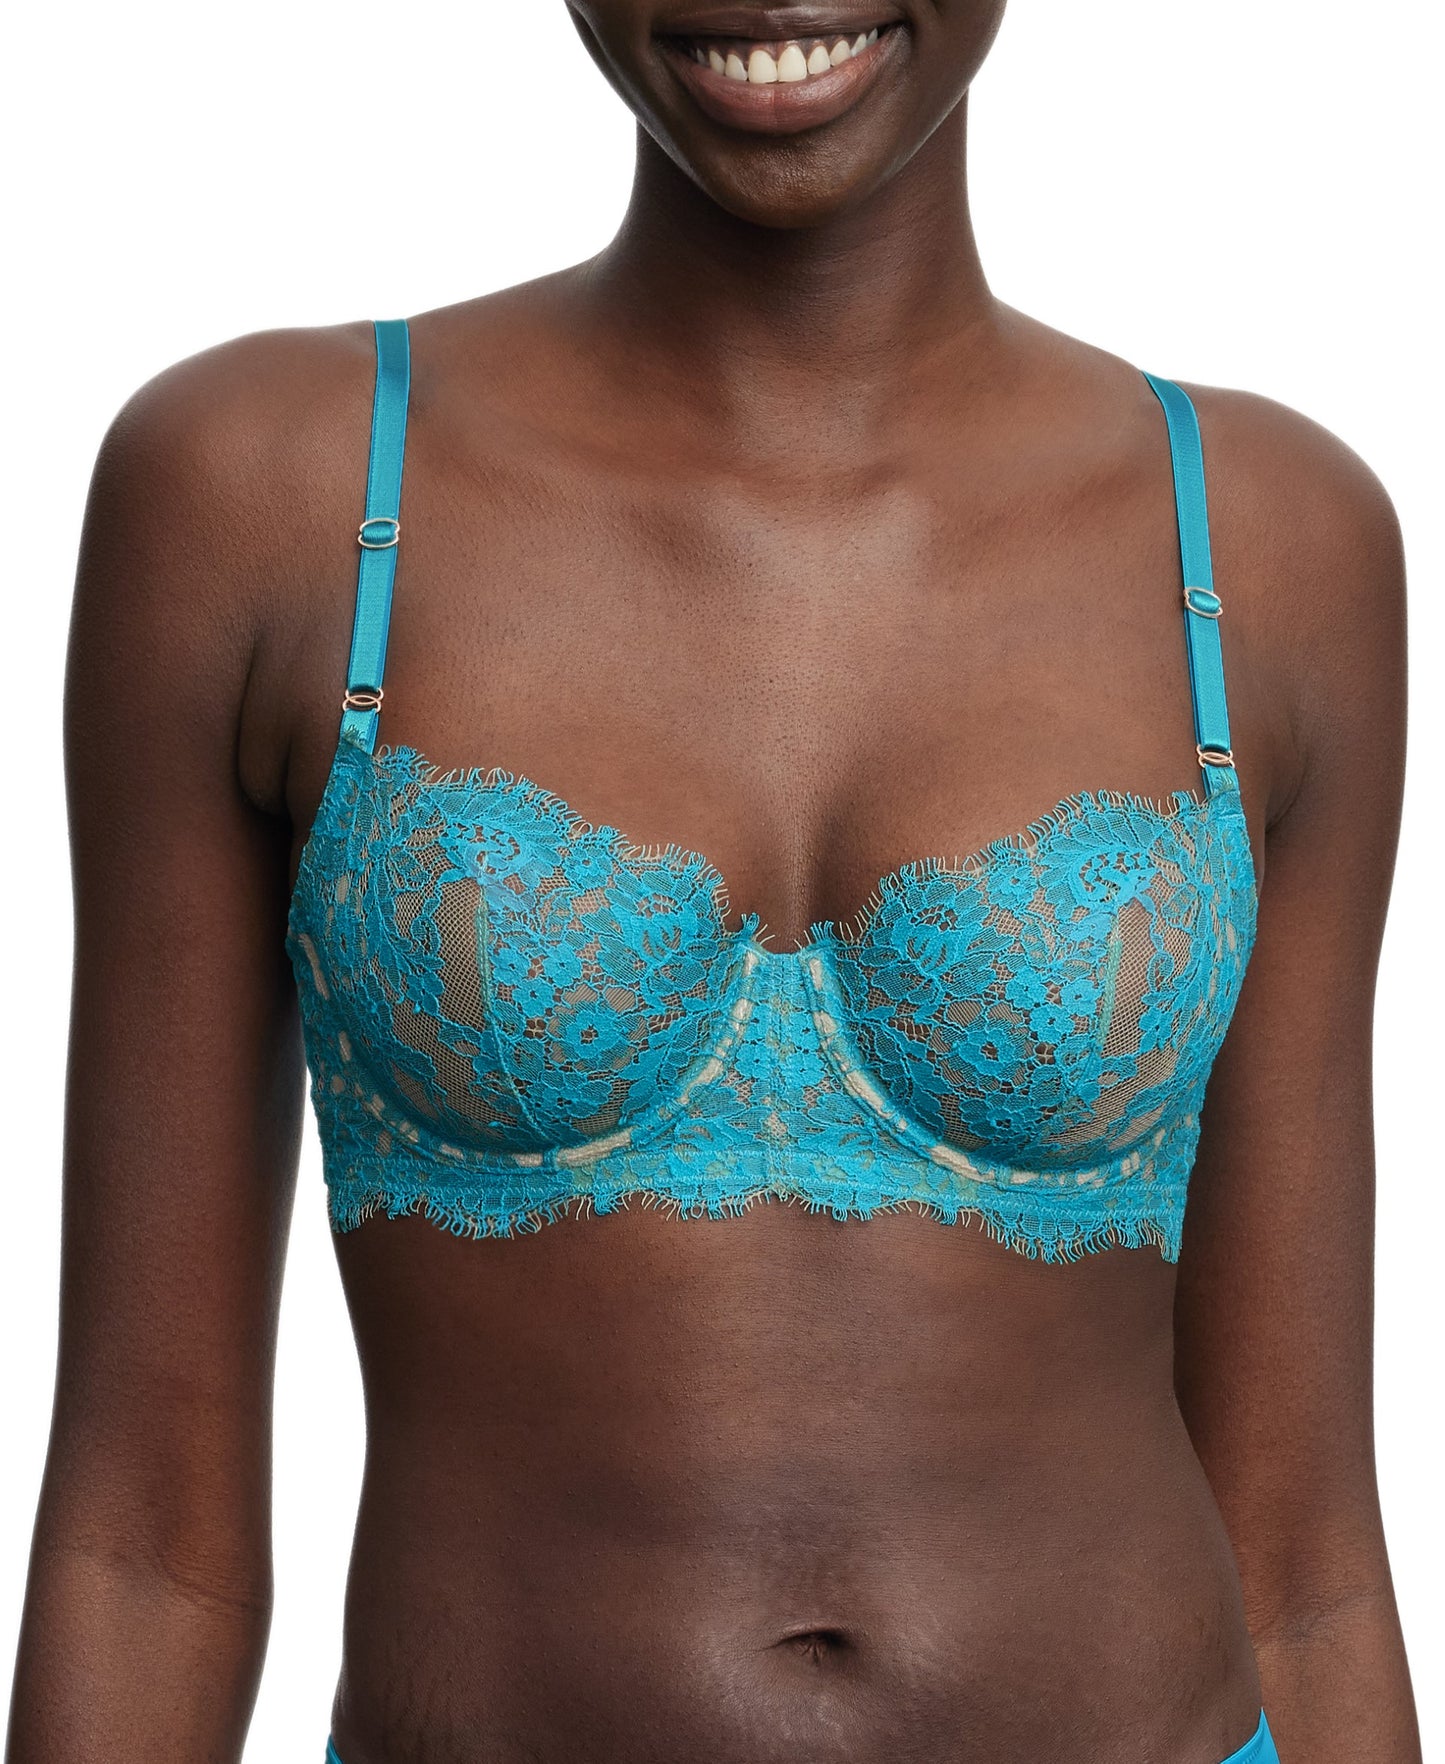 Stunning Periwinkle Blue Lace Bra - Ambrielle Intimates